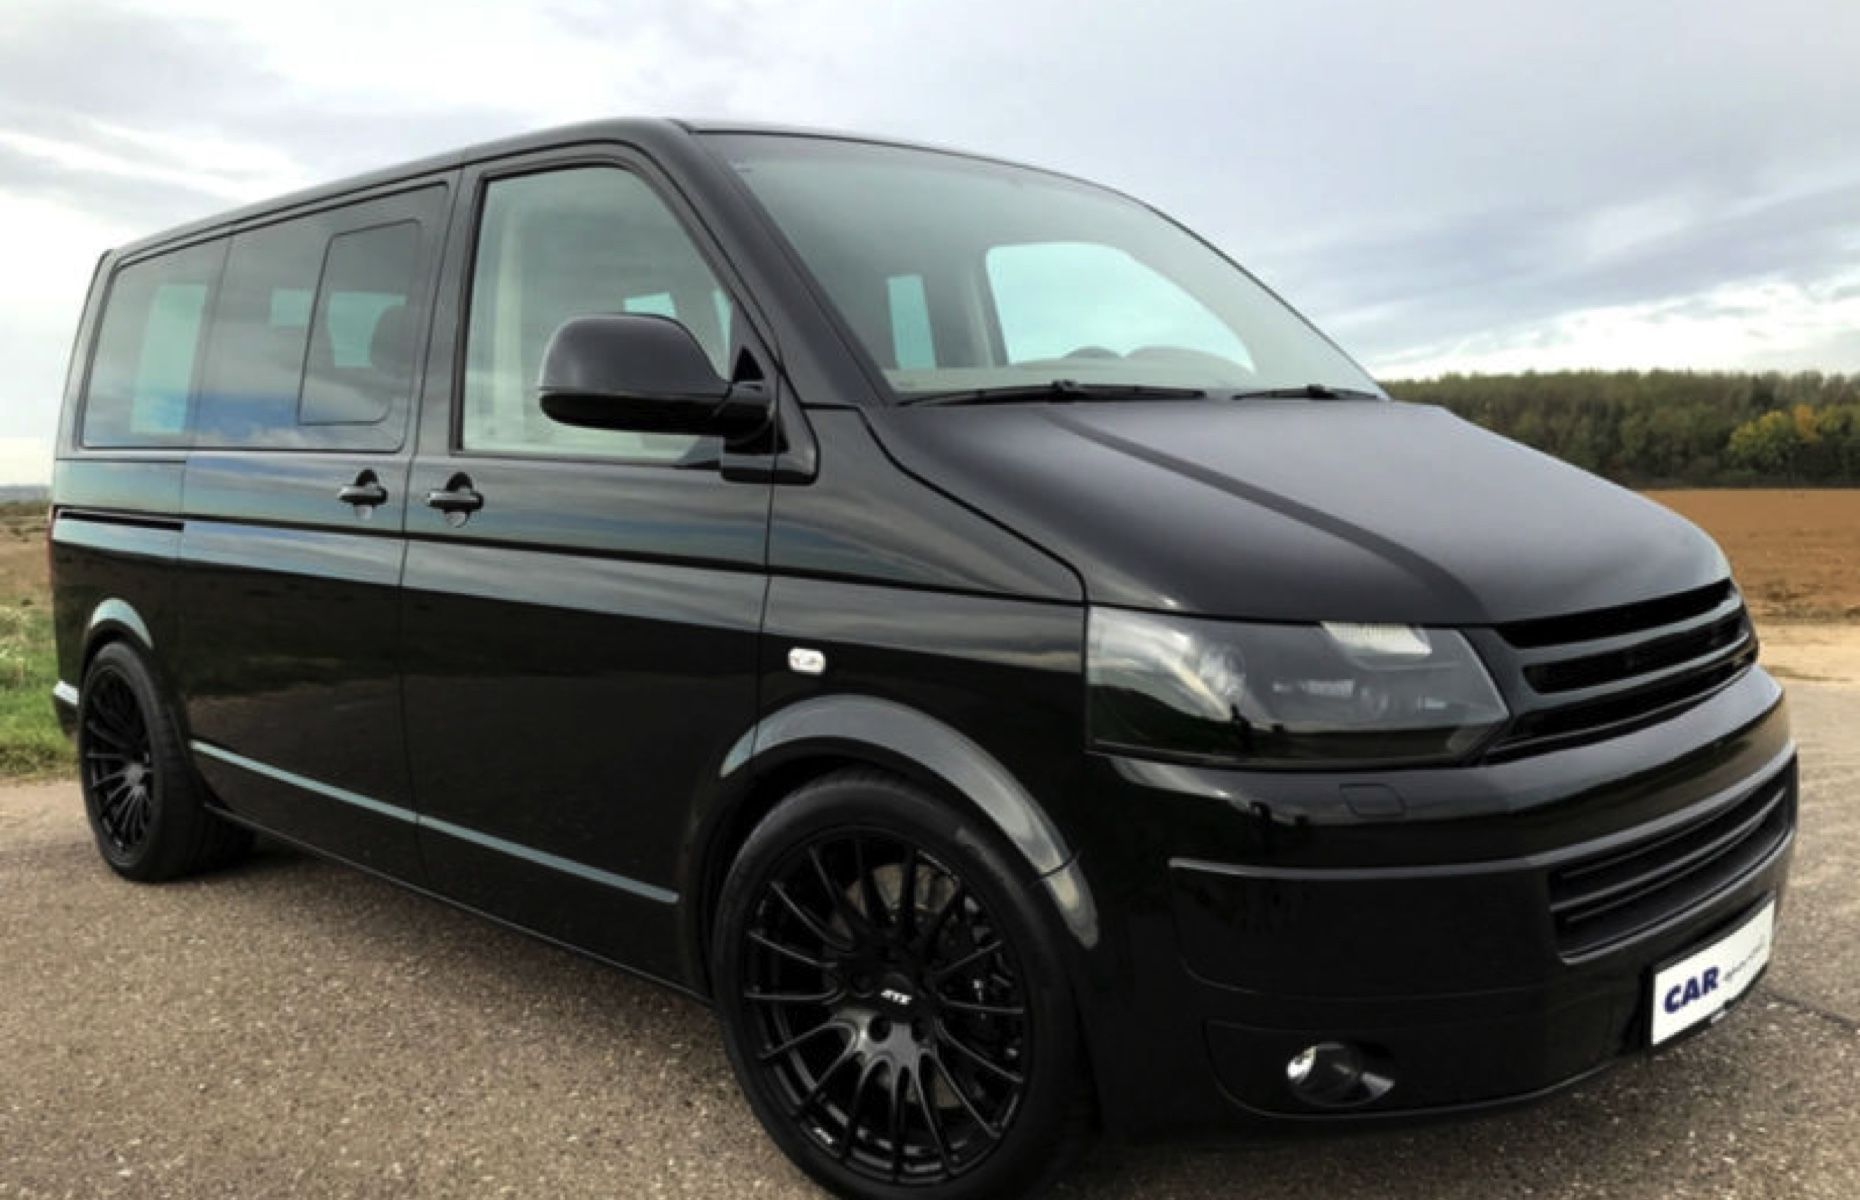 Porsche engine with 580 PS in the VW T5 Multivan from TH